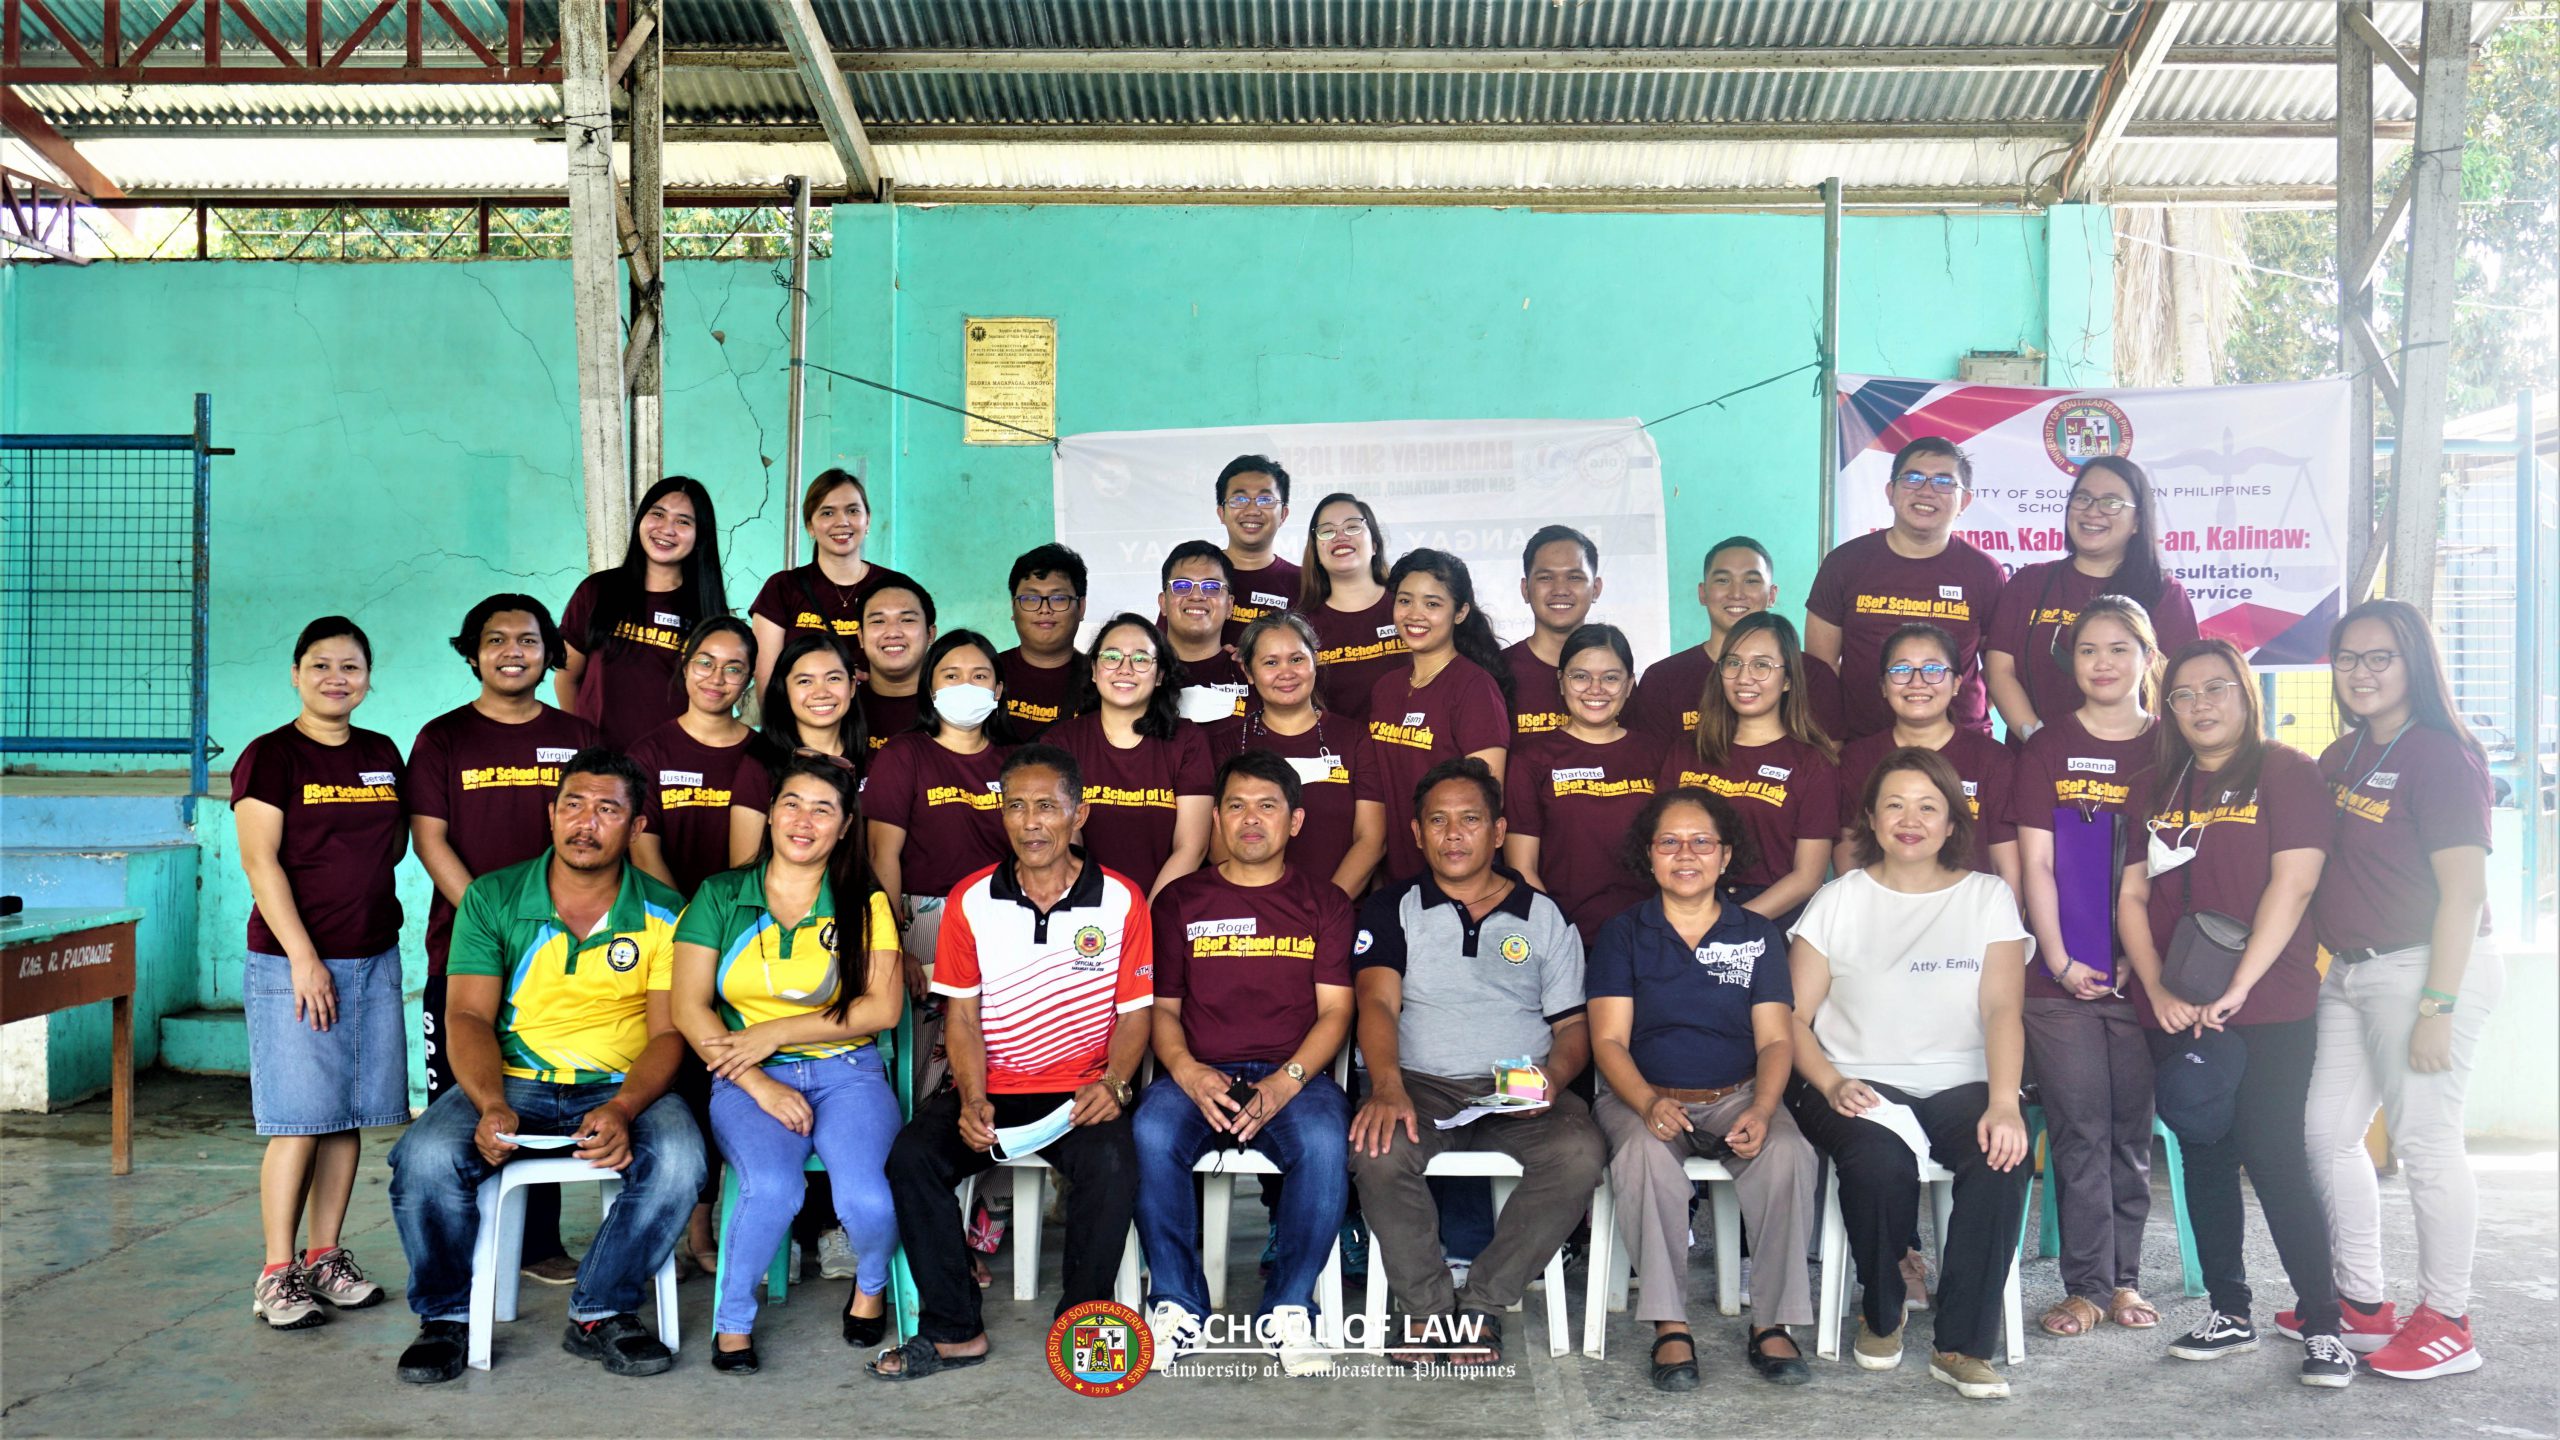 USeP SCHOOL OF LAW CONDUCTS COMMUNITY LEGAL AID MISSION AT BRGY. SAN JOSE, MATANAO DAVAO DEL SUR